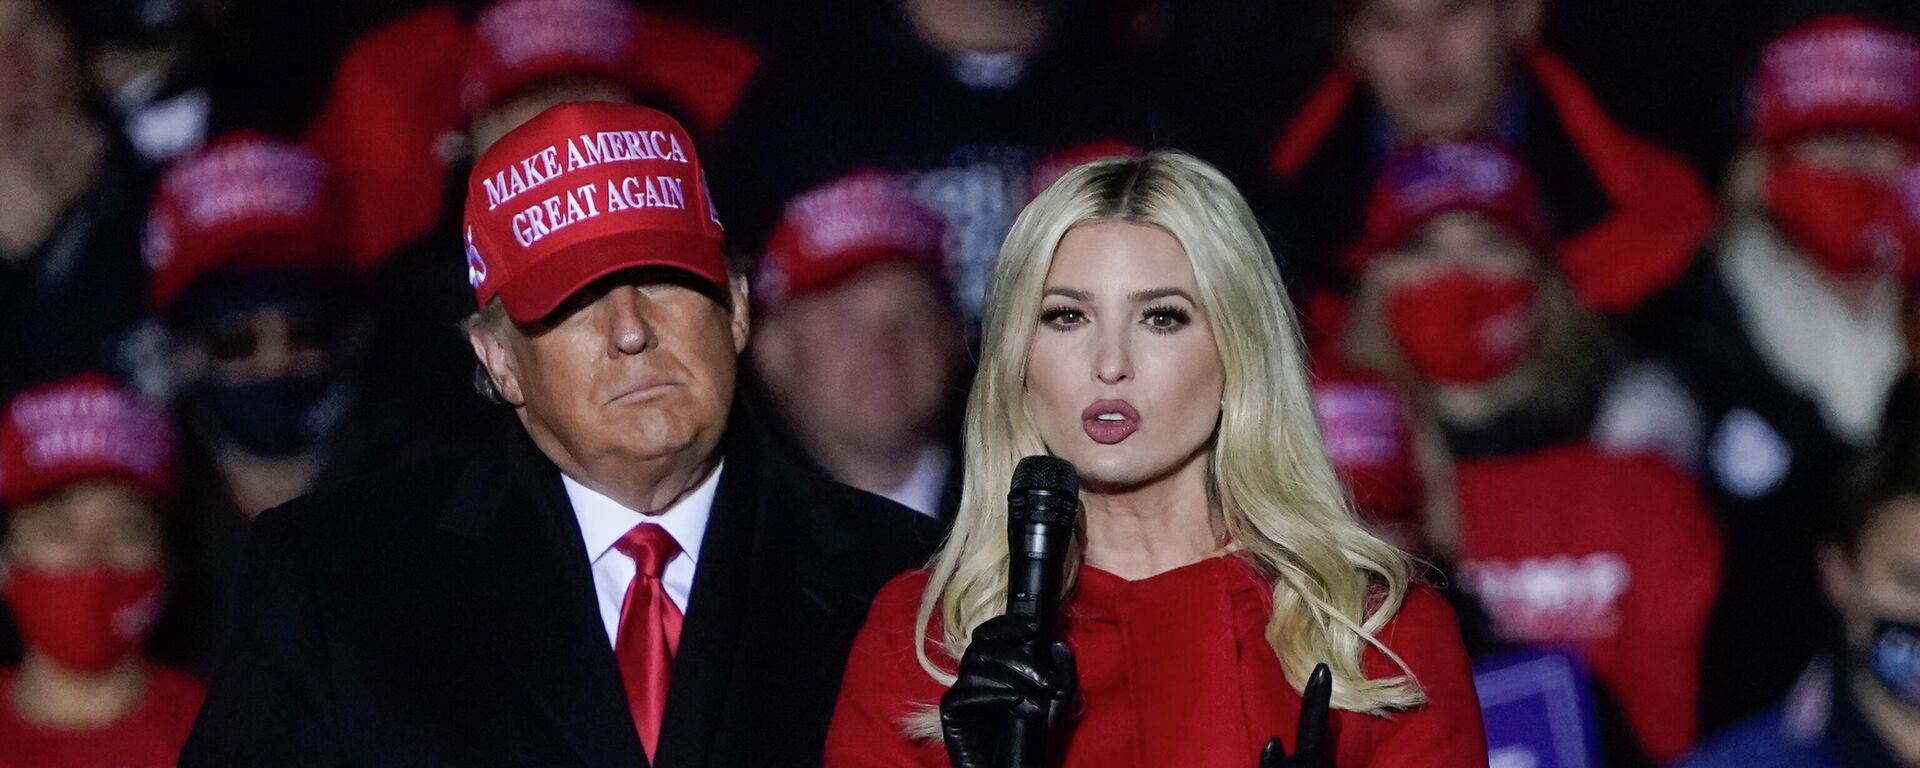 In this Nov. 2, 2020 file photo, Ivanka Trump speaks at a campaign event while her father, President Donald Trump, watches in Kenosha, Wis. New York's attorney general has sent a subpoena to the Trump Organization for records related to consulting fees paid to Ivanka Trump as part of a broad civil investigation into the president's business dealings, a law enforcement official said Thursday, Nov. 19, 2020 - Sputnik International, 1920, 16.11.2022